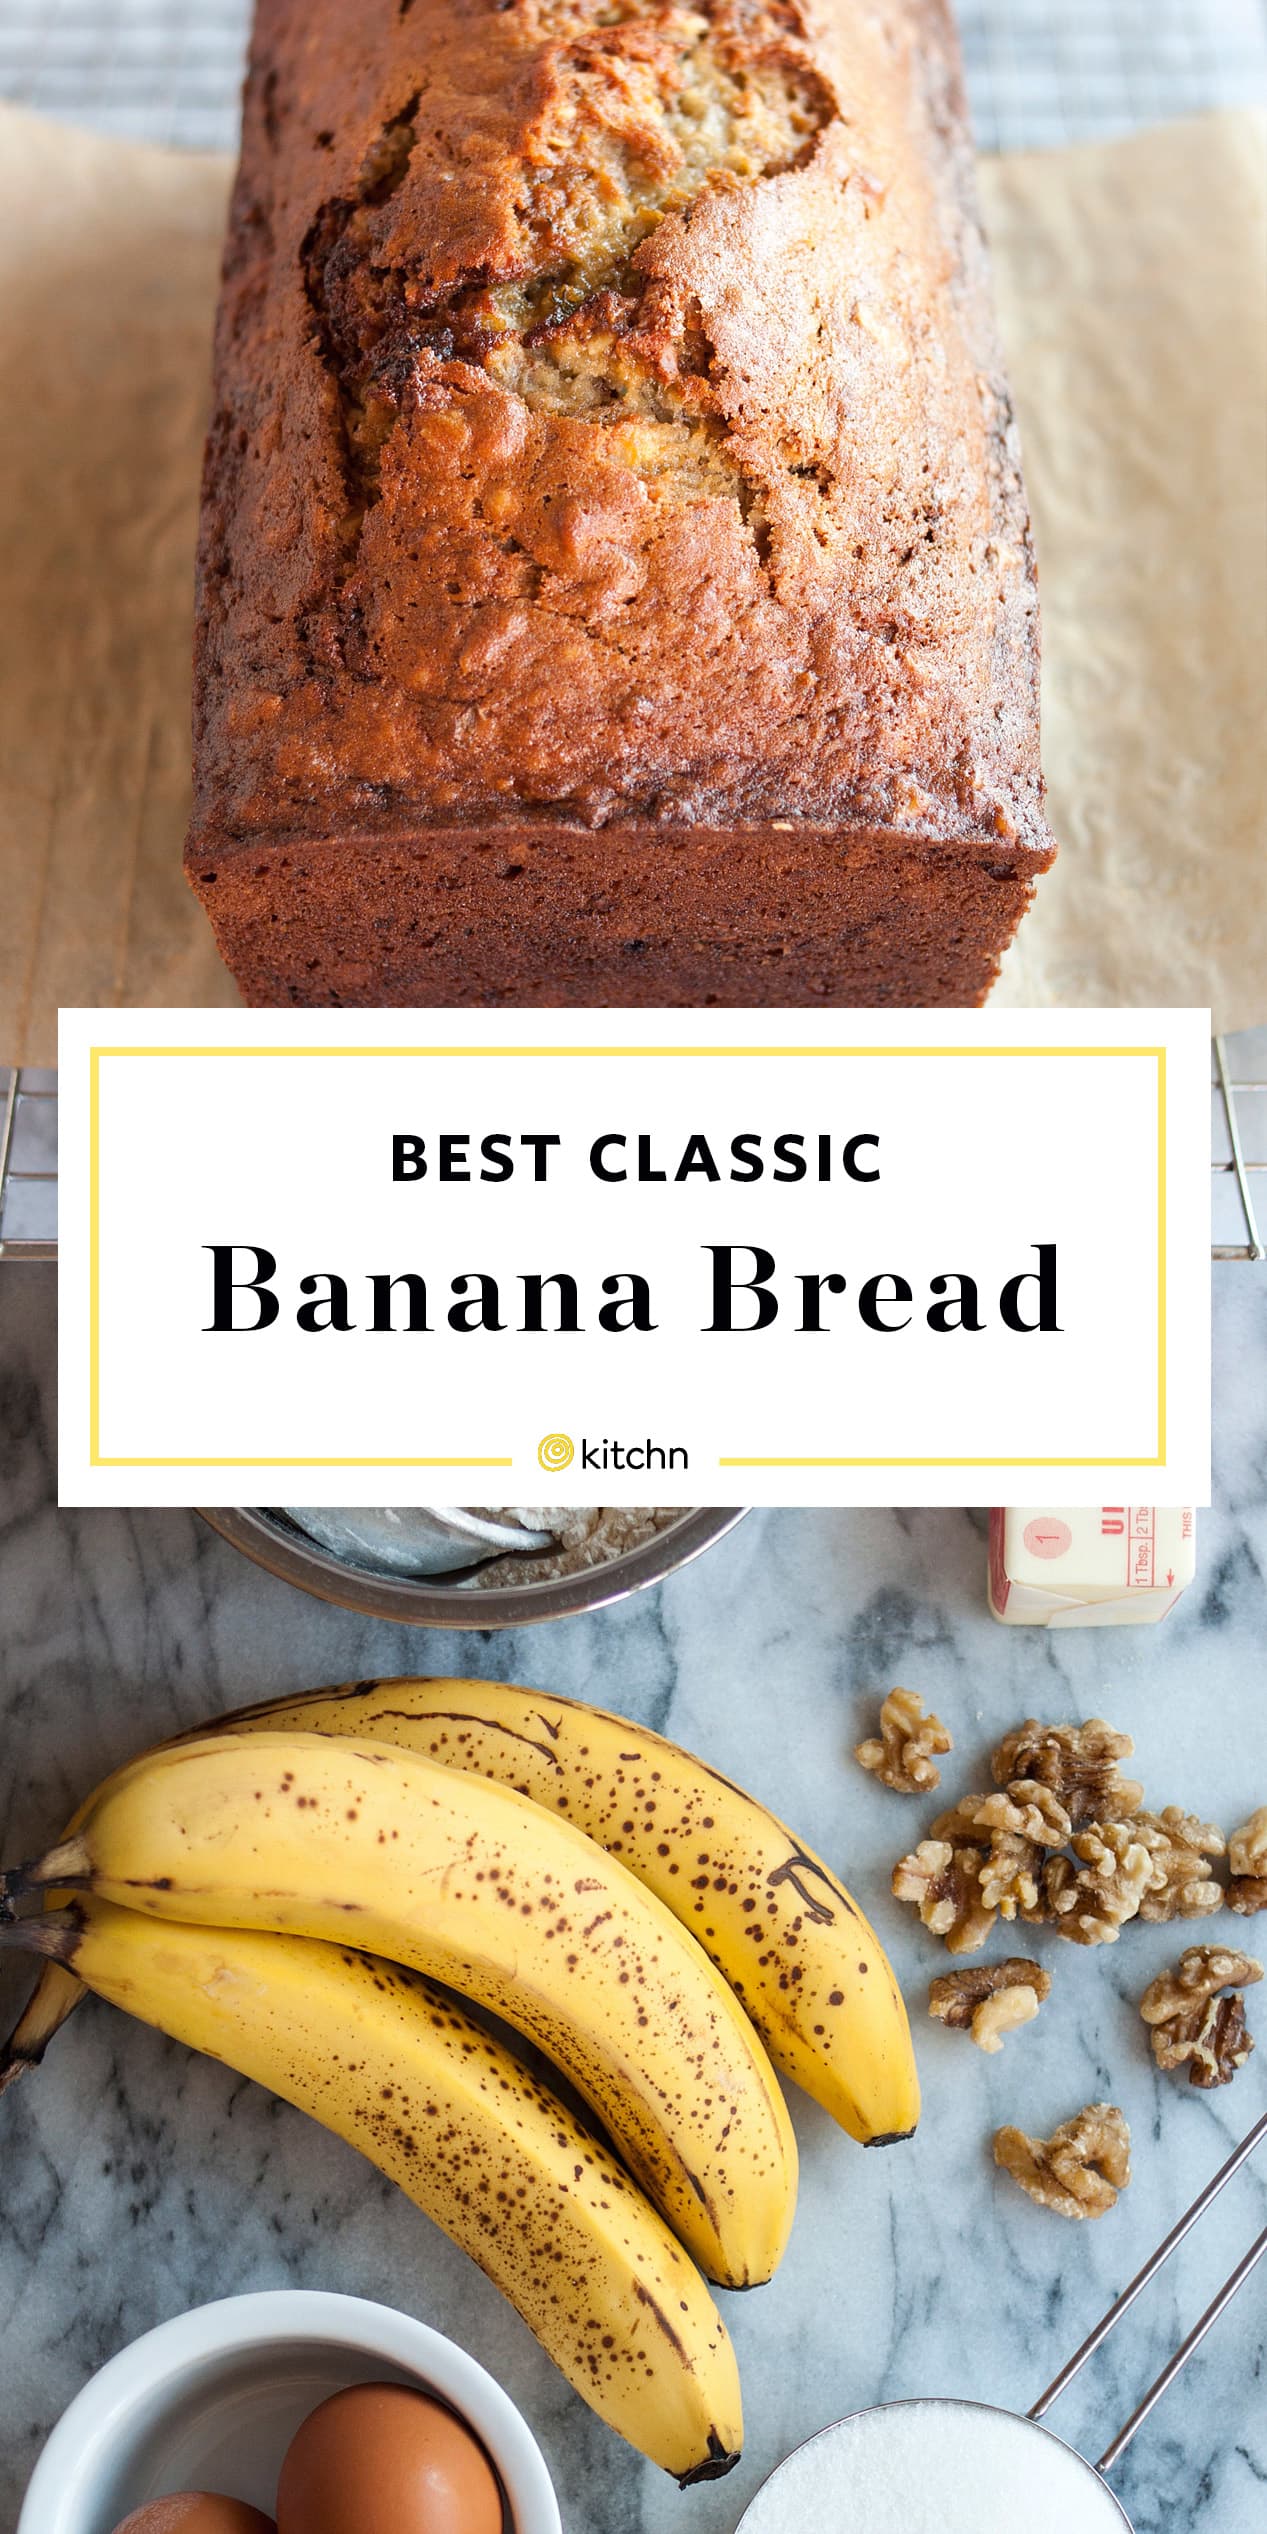 How To Make Banana Bread: The Simplest, Easiest Recipe  Kitchn